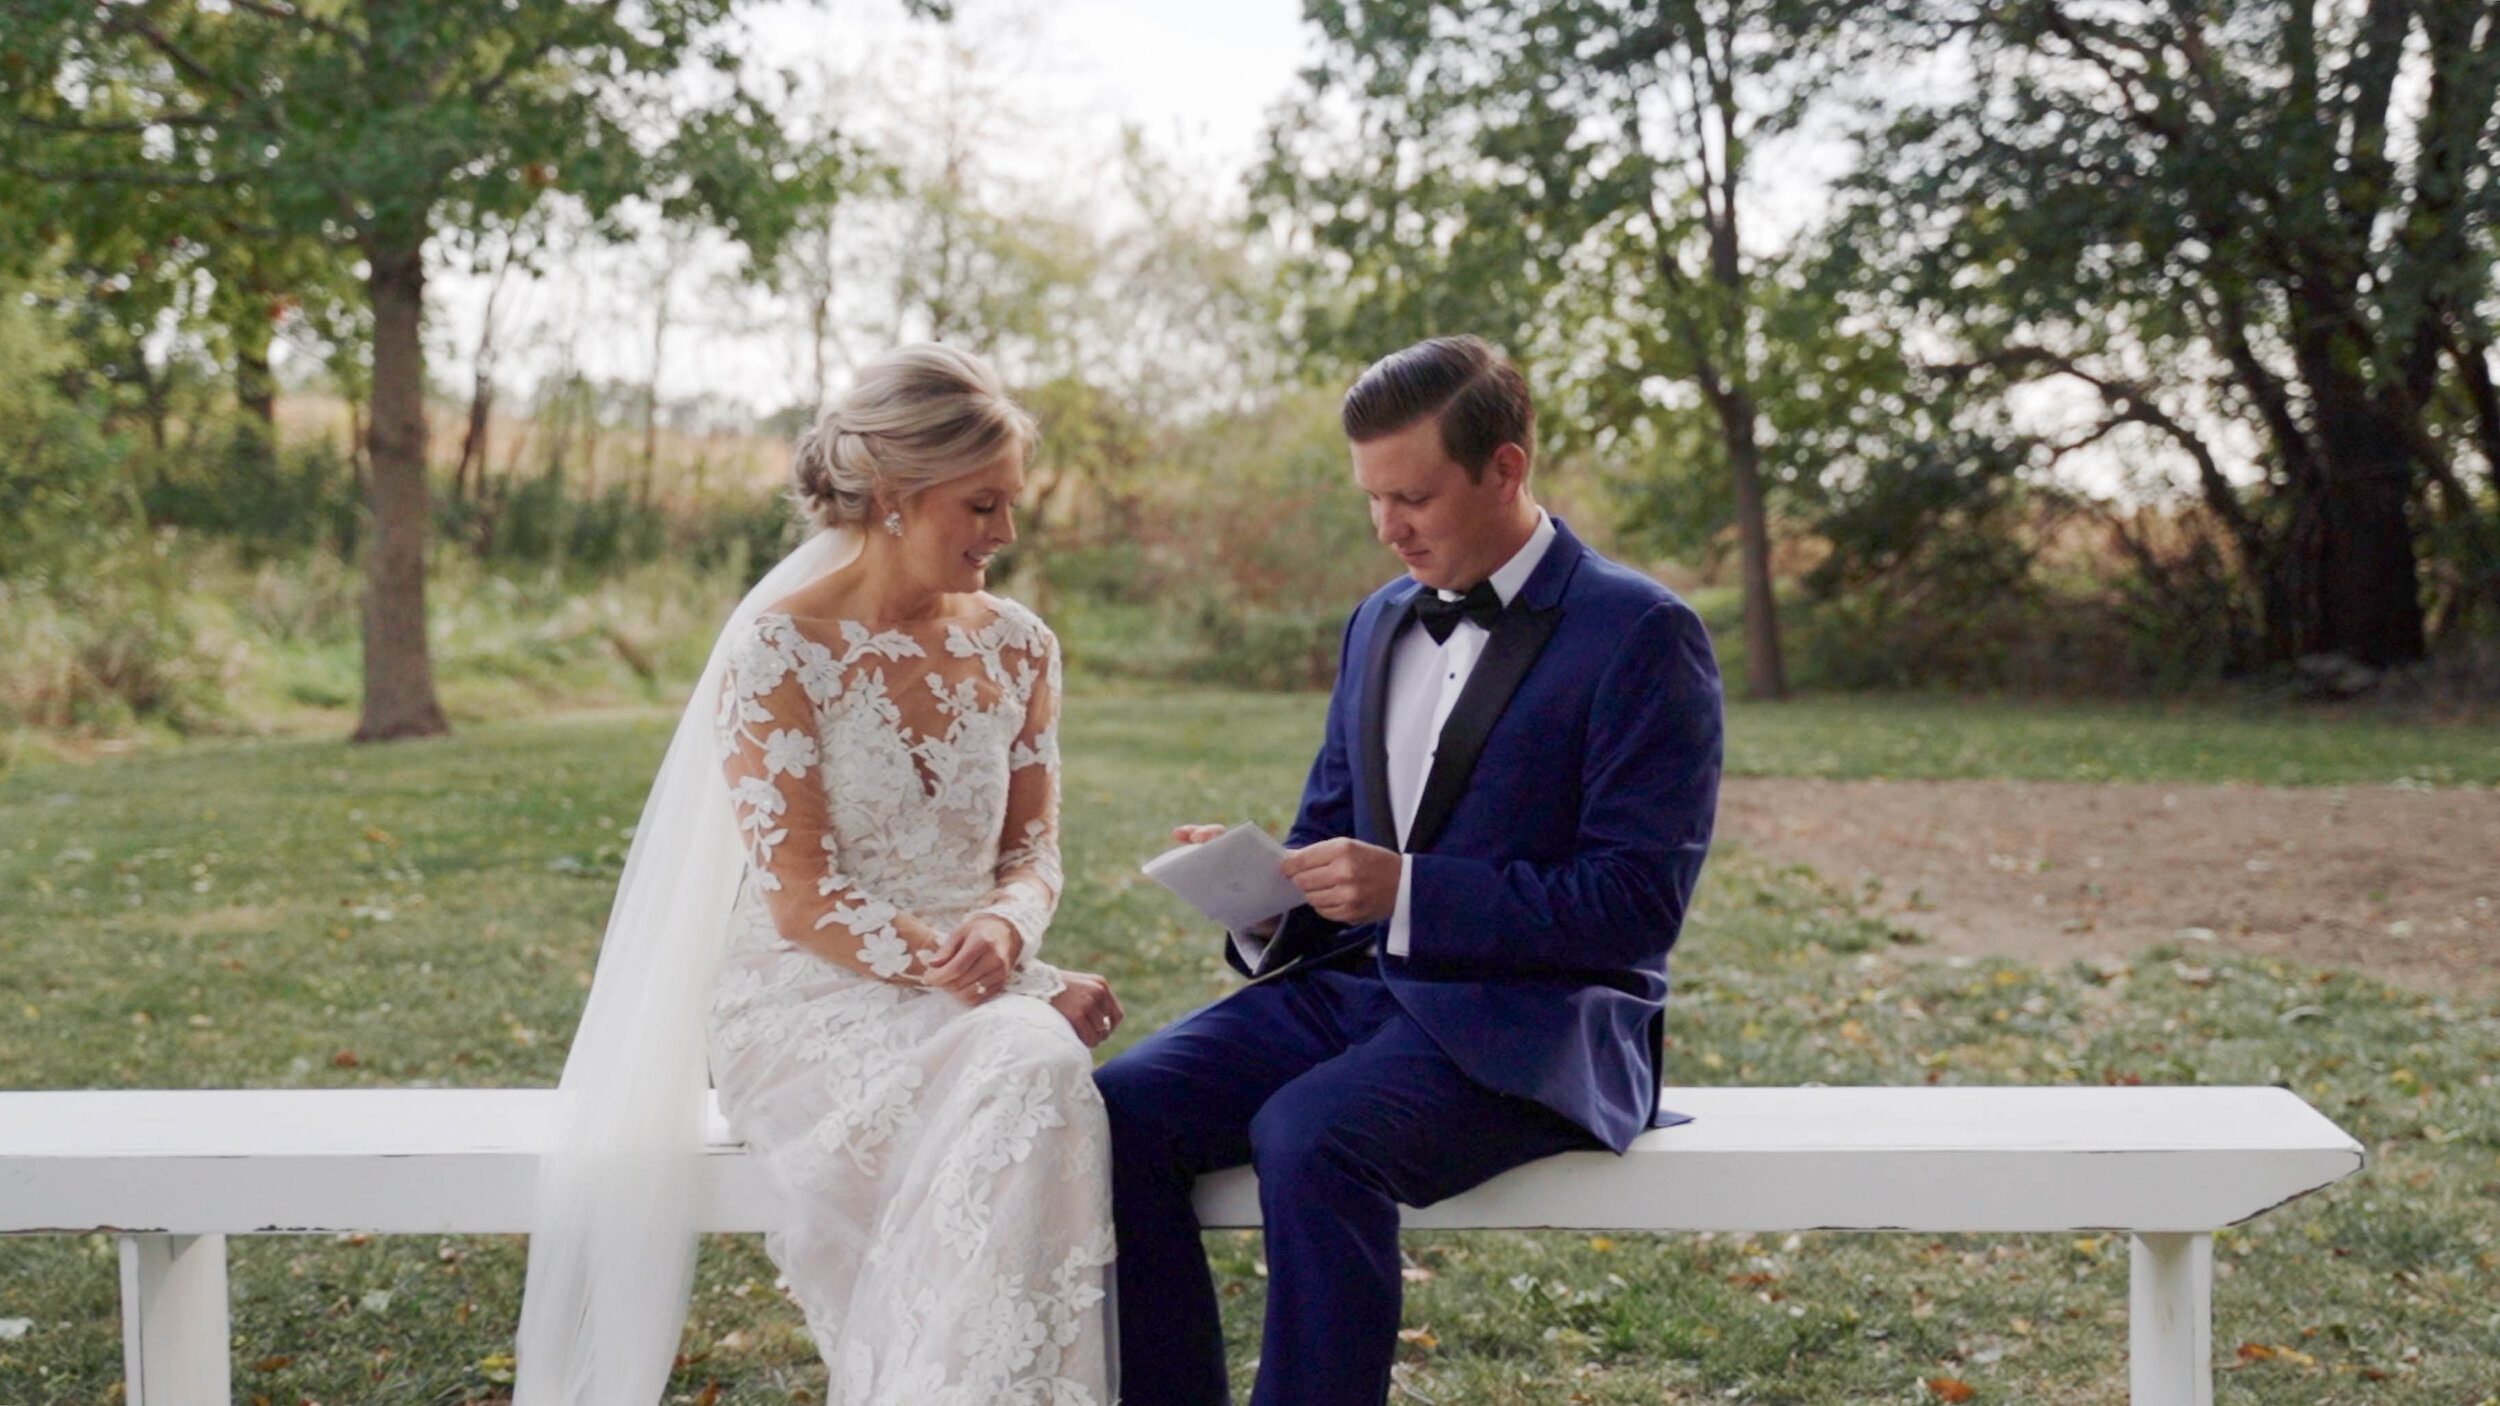 Stl wedding videography bride and groom reading letters